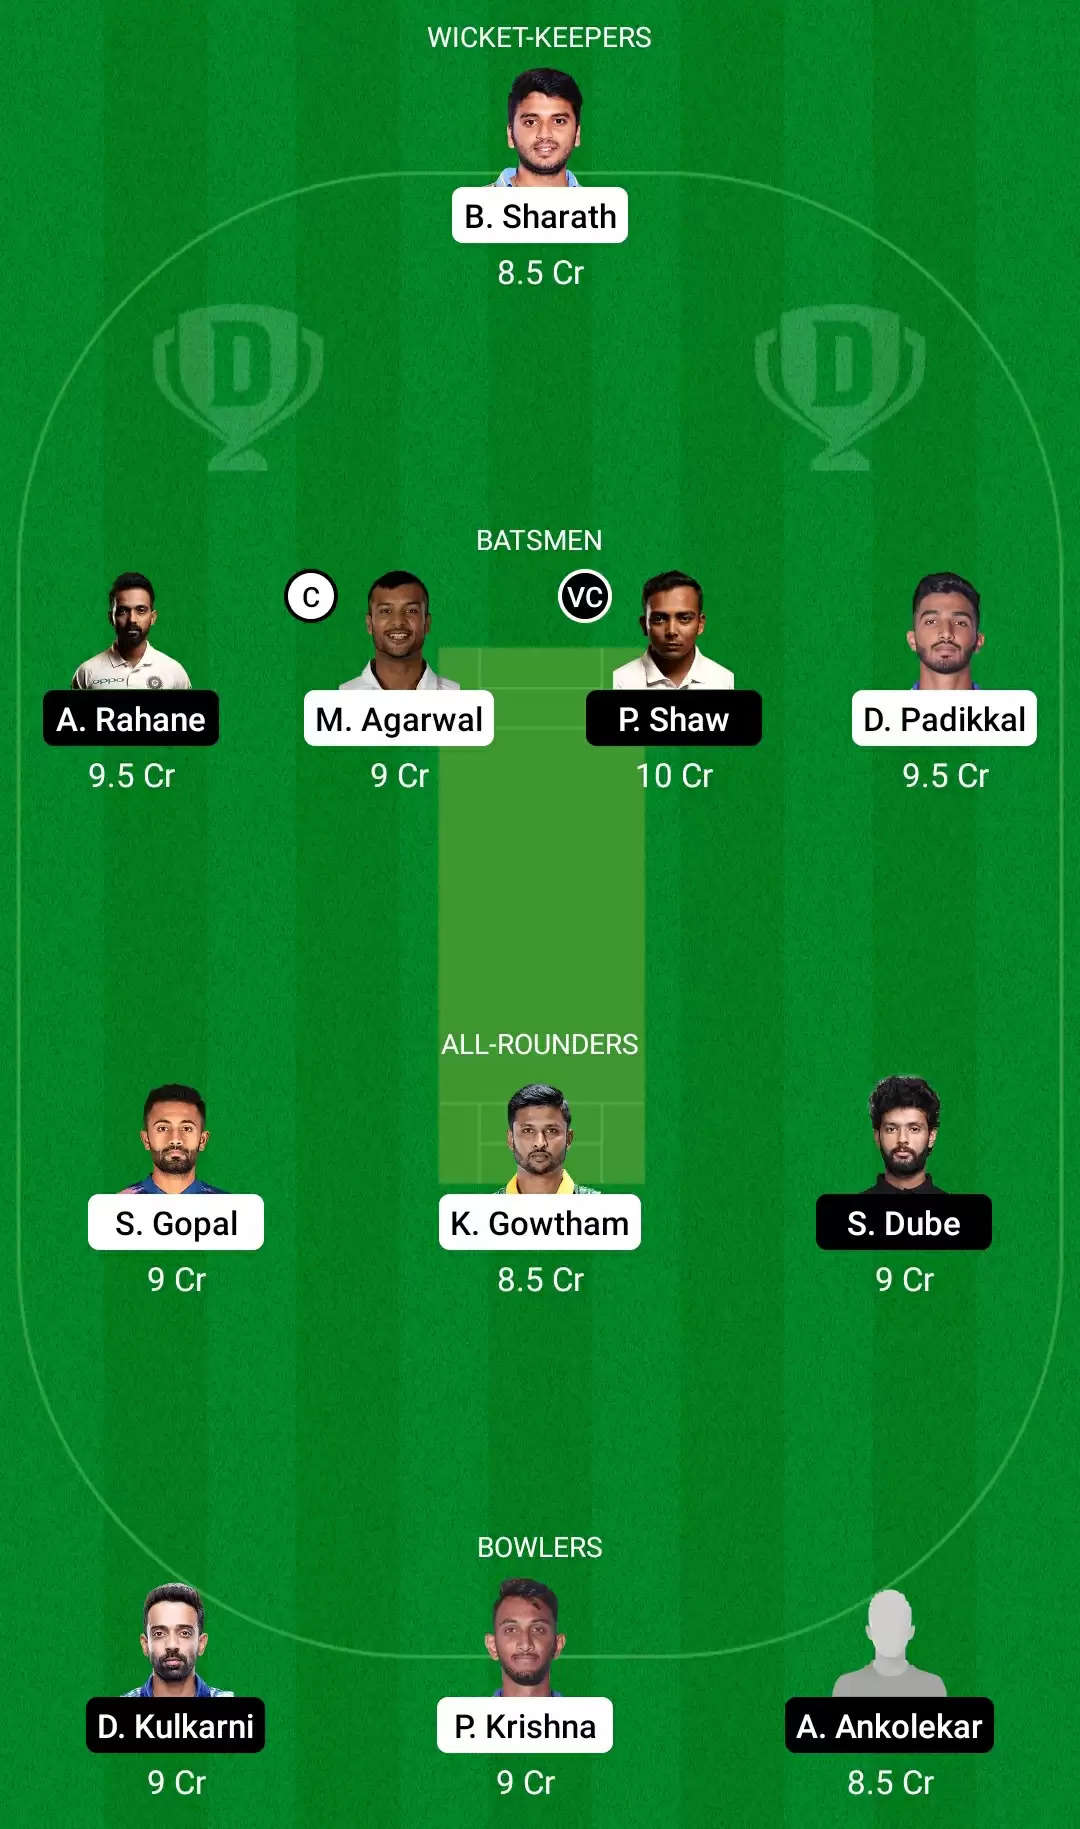 KAR vs MUM Dream11 Prediction for Syed Mushtaq Ali Trophy 2021/22: Playing XI, Fantasy Cricket Tips, Team, Weather Updates and Pitch Report